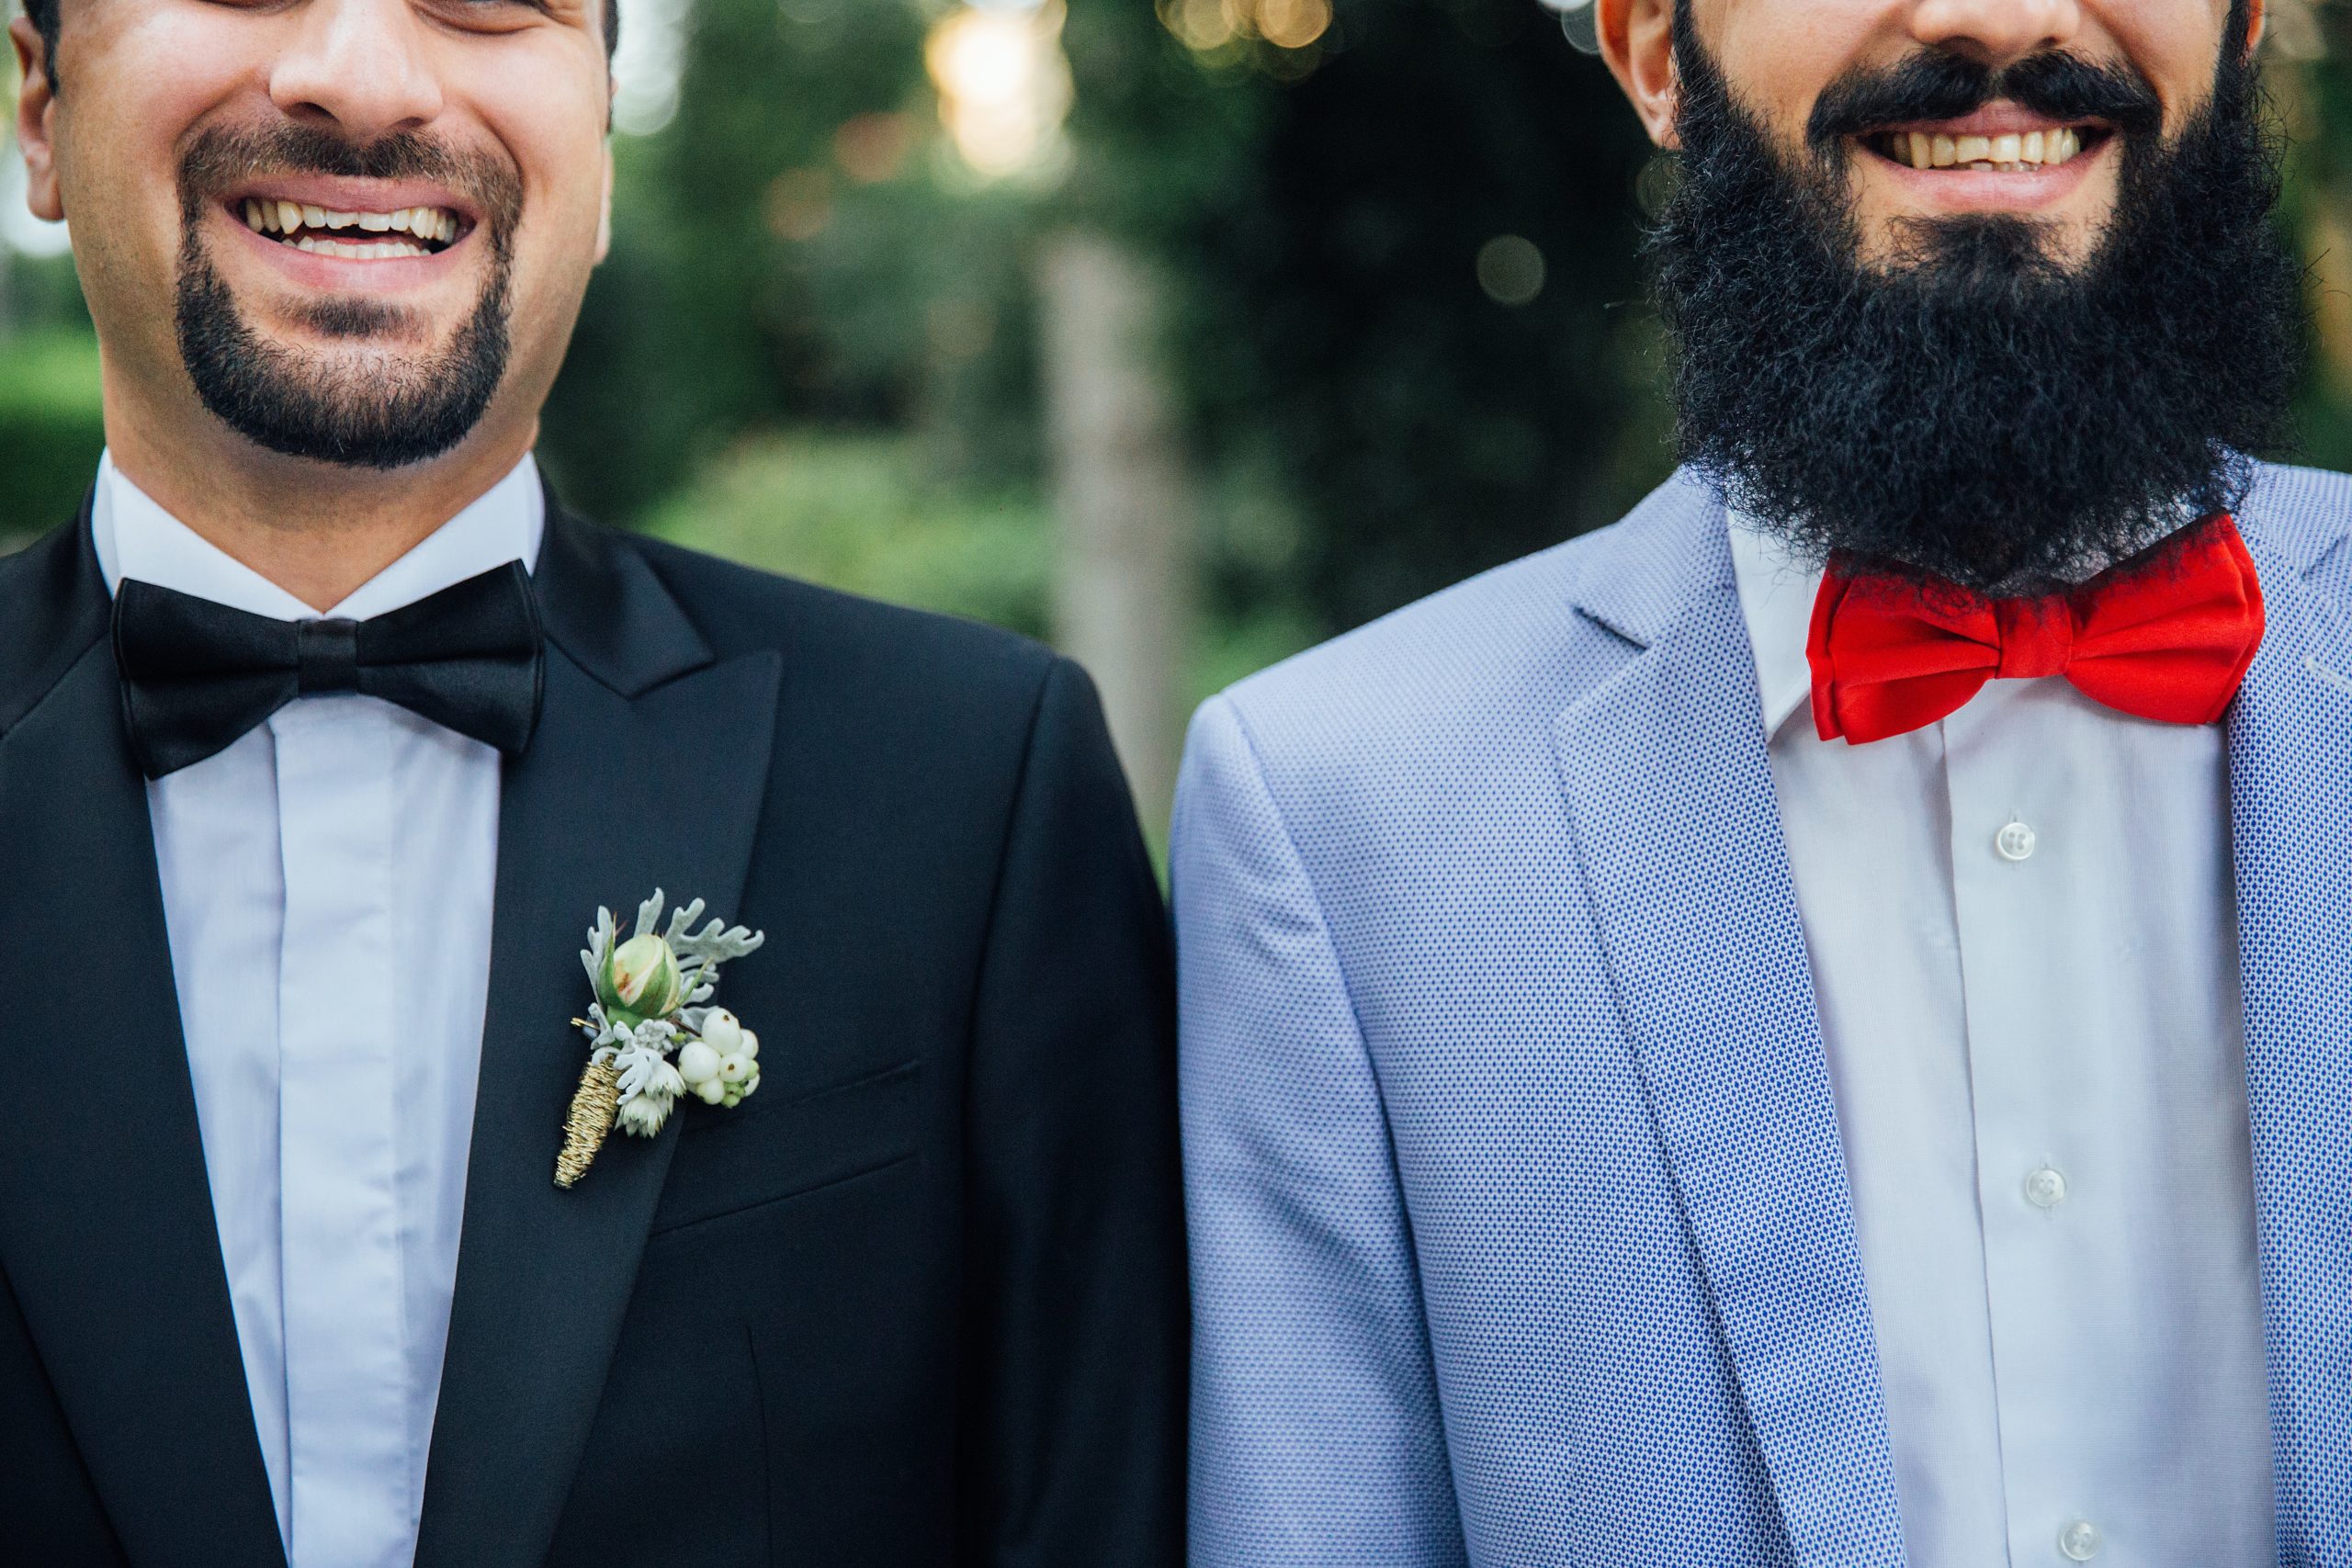 What Colour Suit Should I Wear At My Wedding?